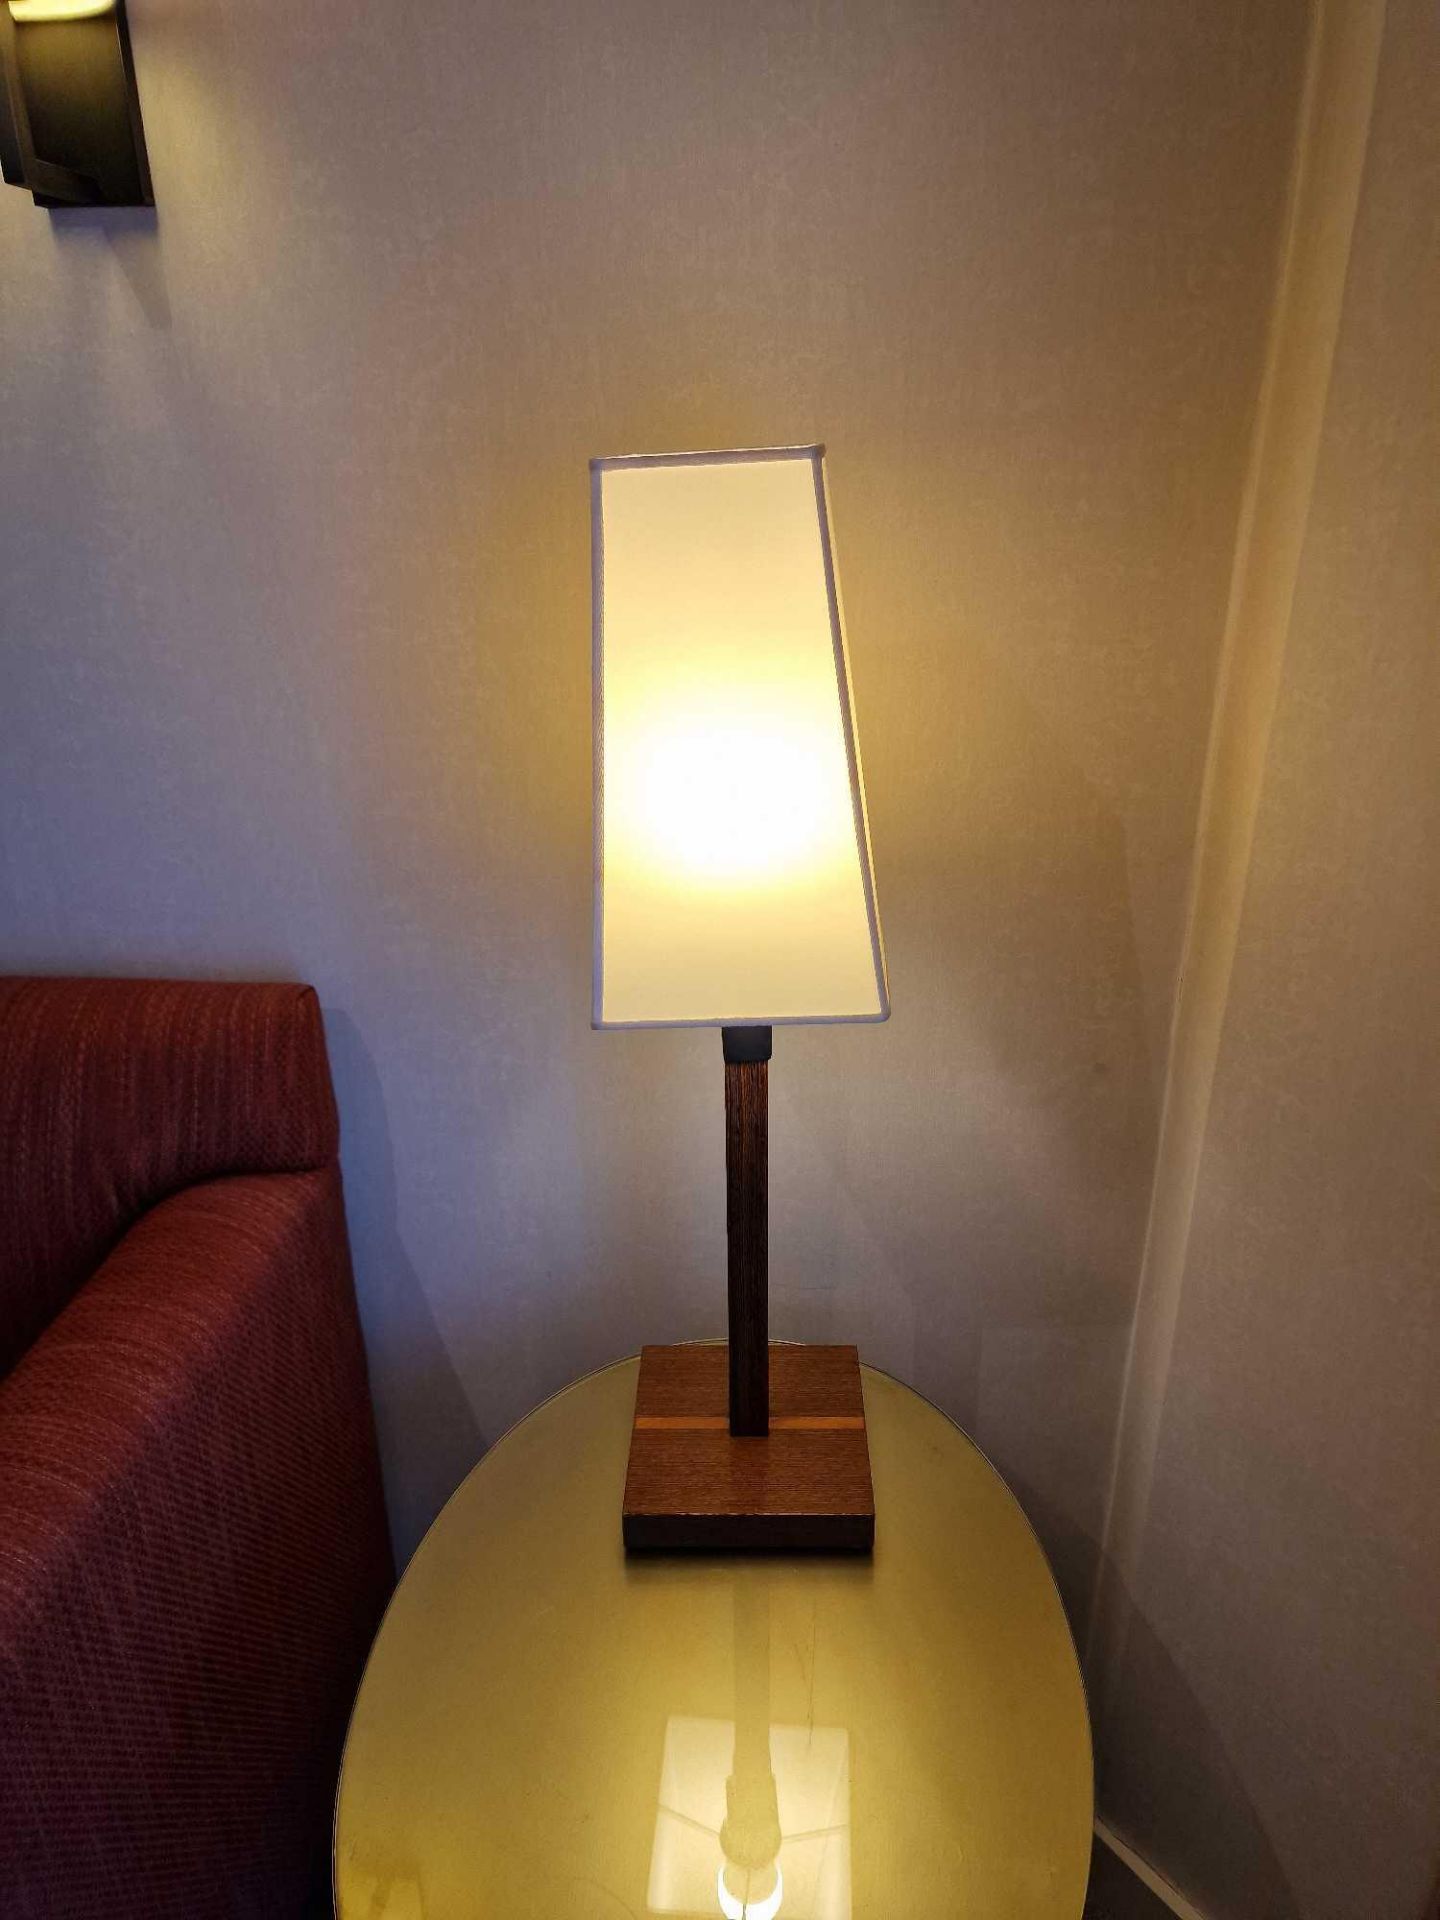 Promemoria table lamp wood column lamp with bronzed collar decoration on square base complete with